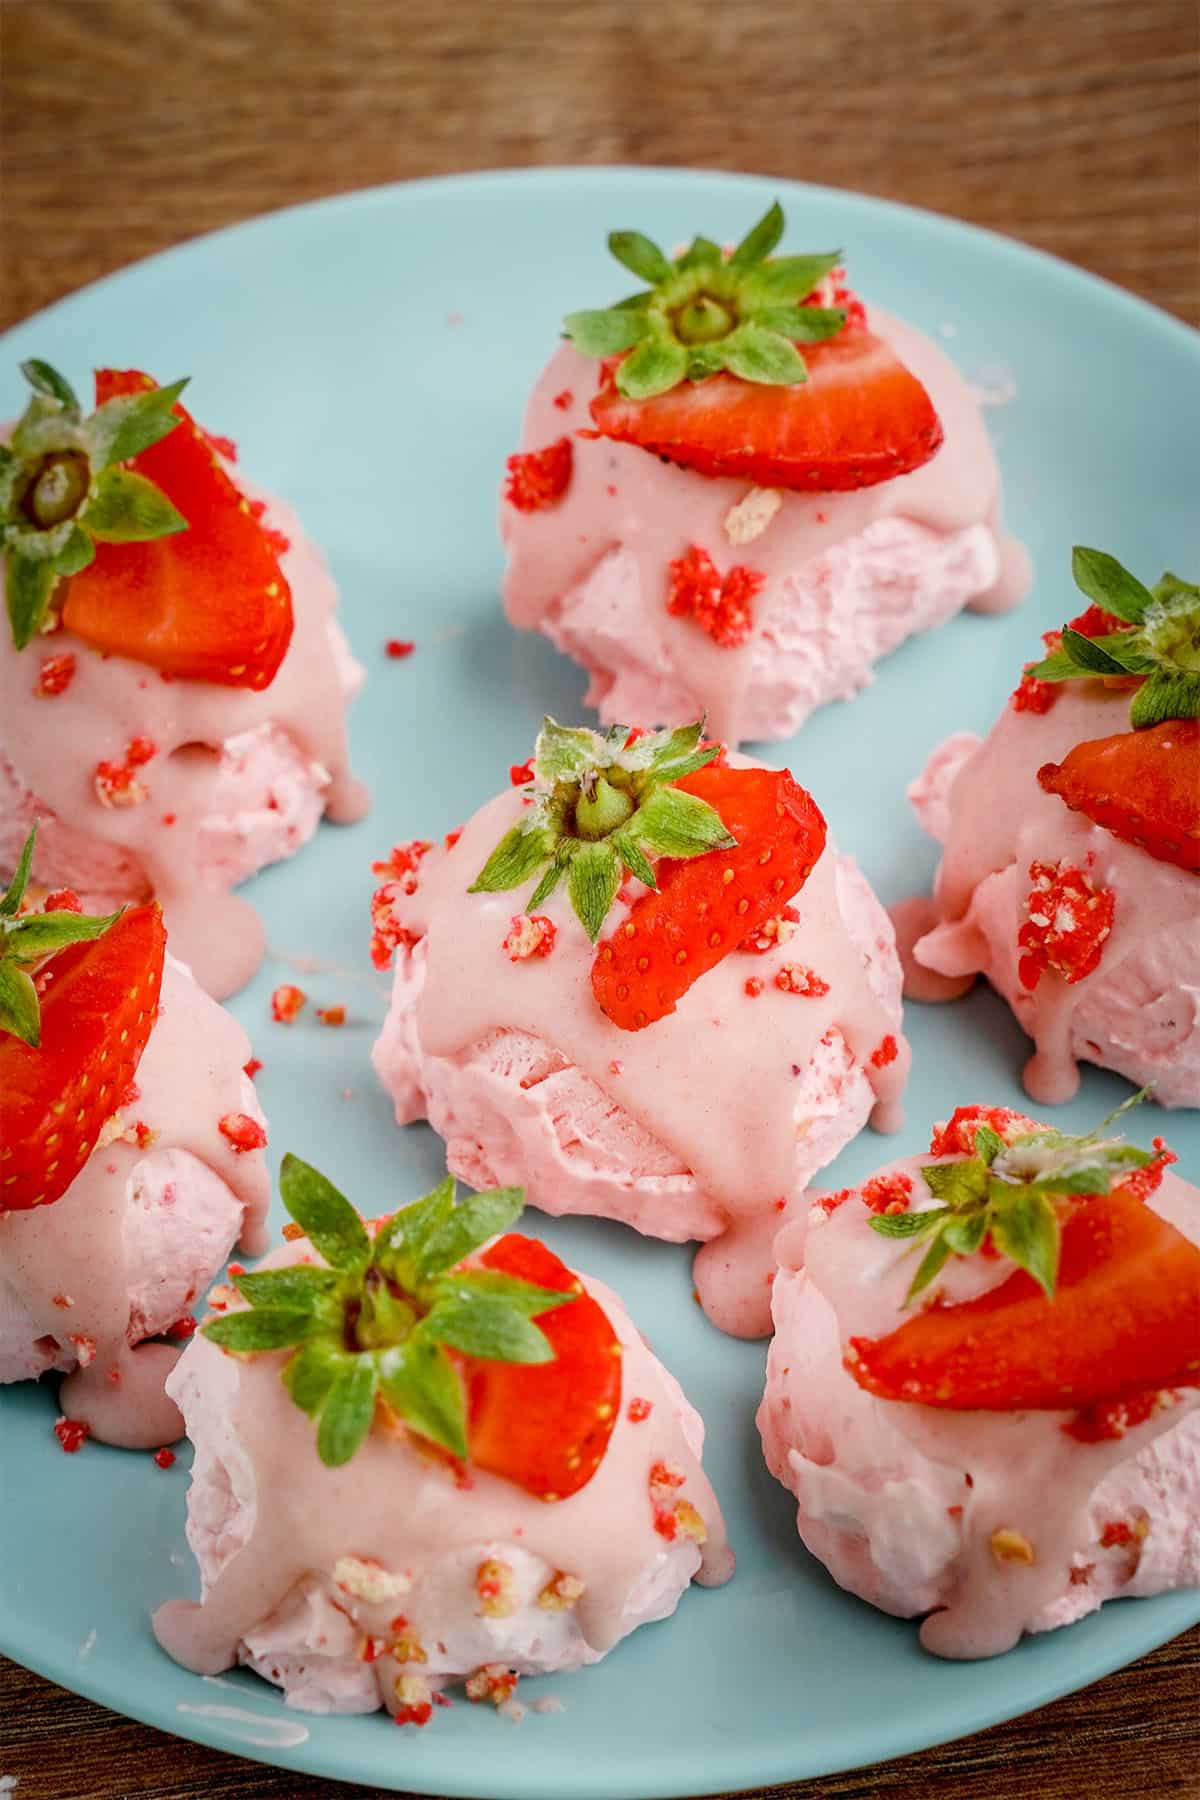 Strawberry slices upon these Truffles.